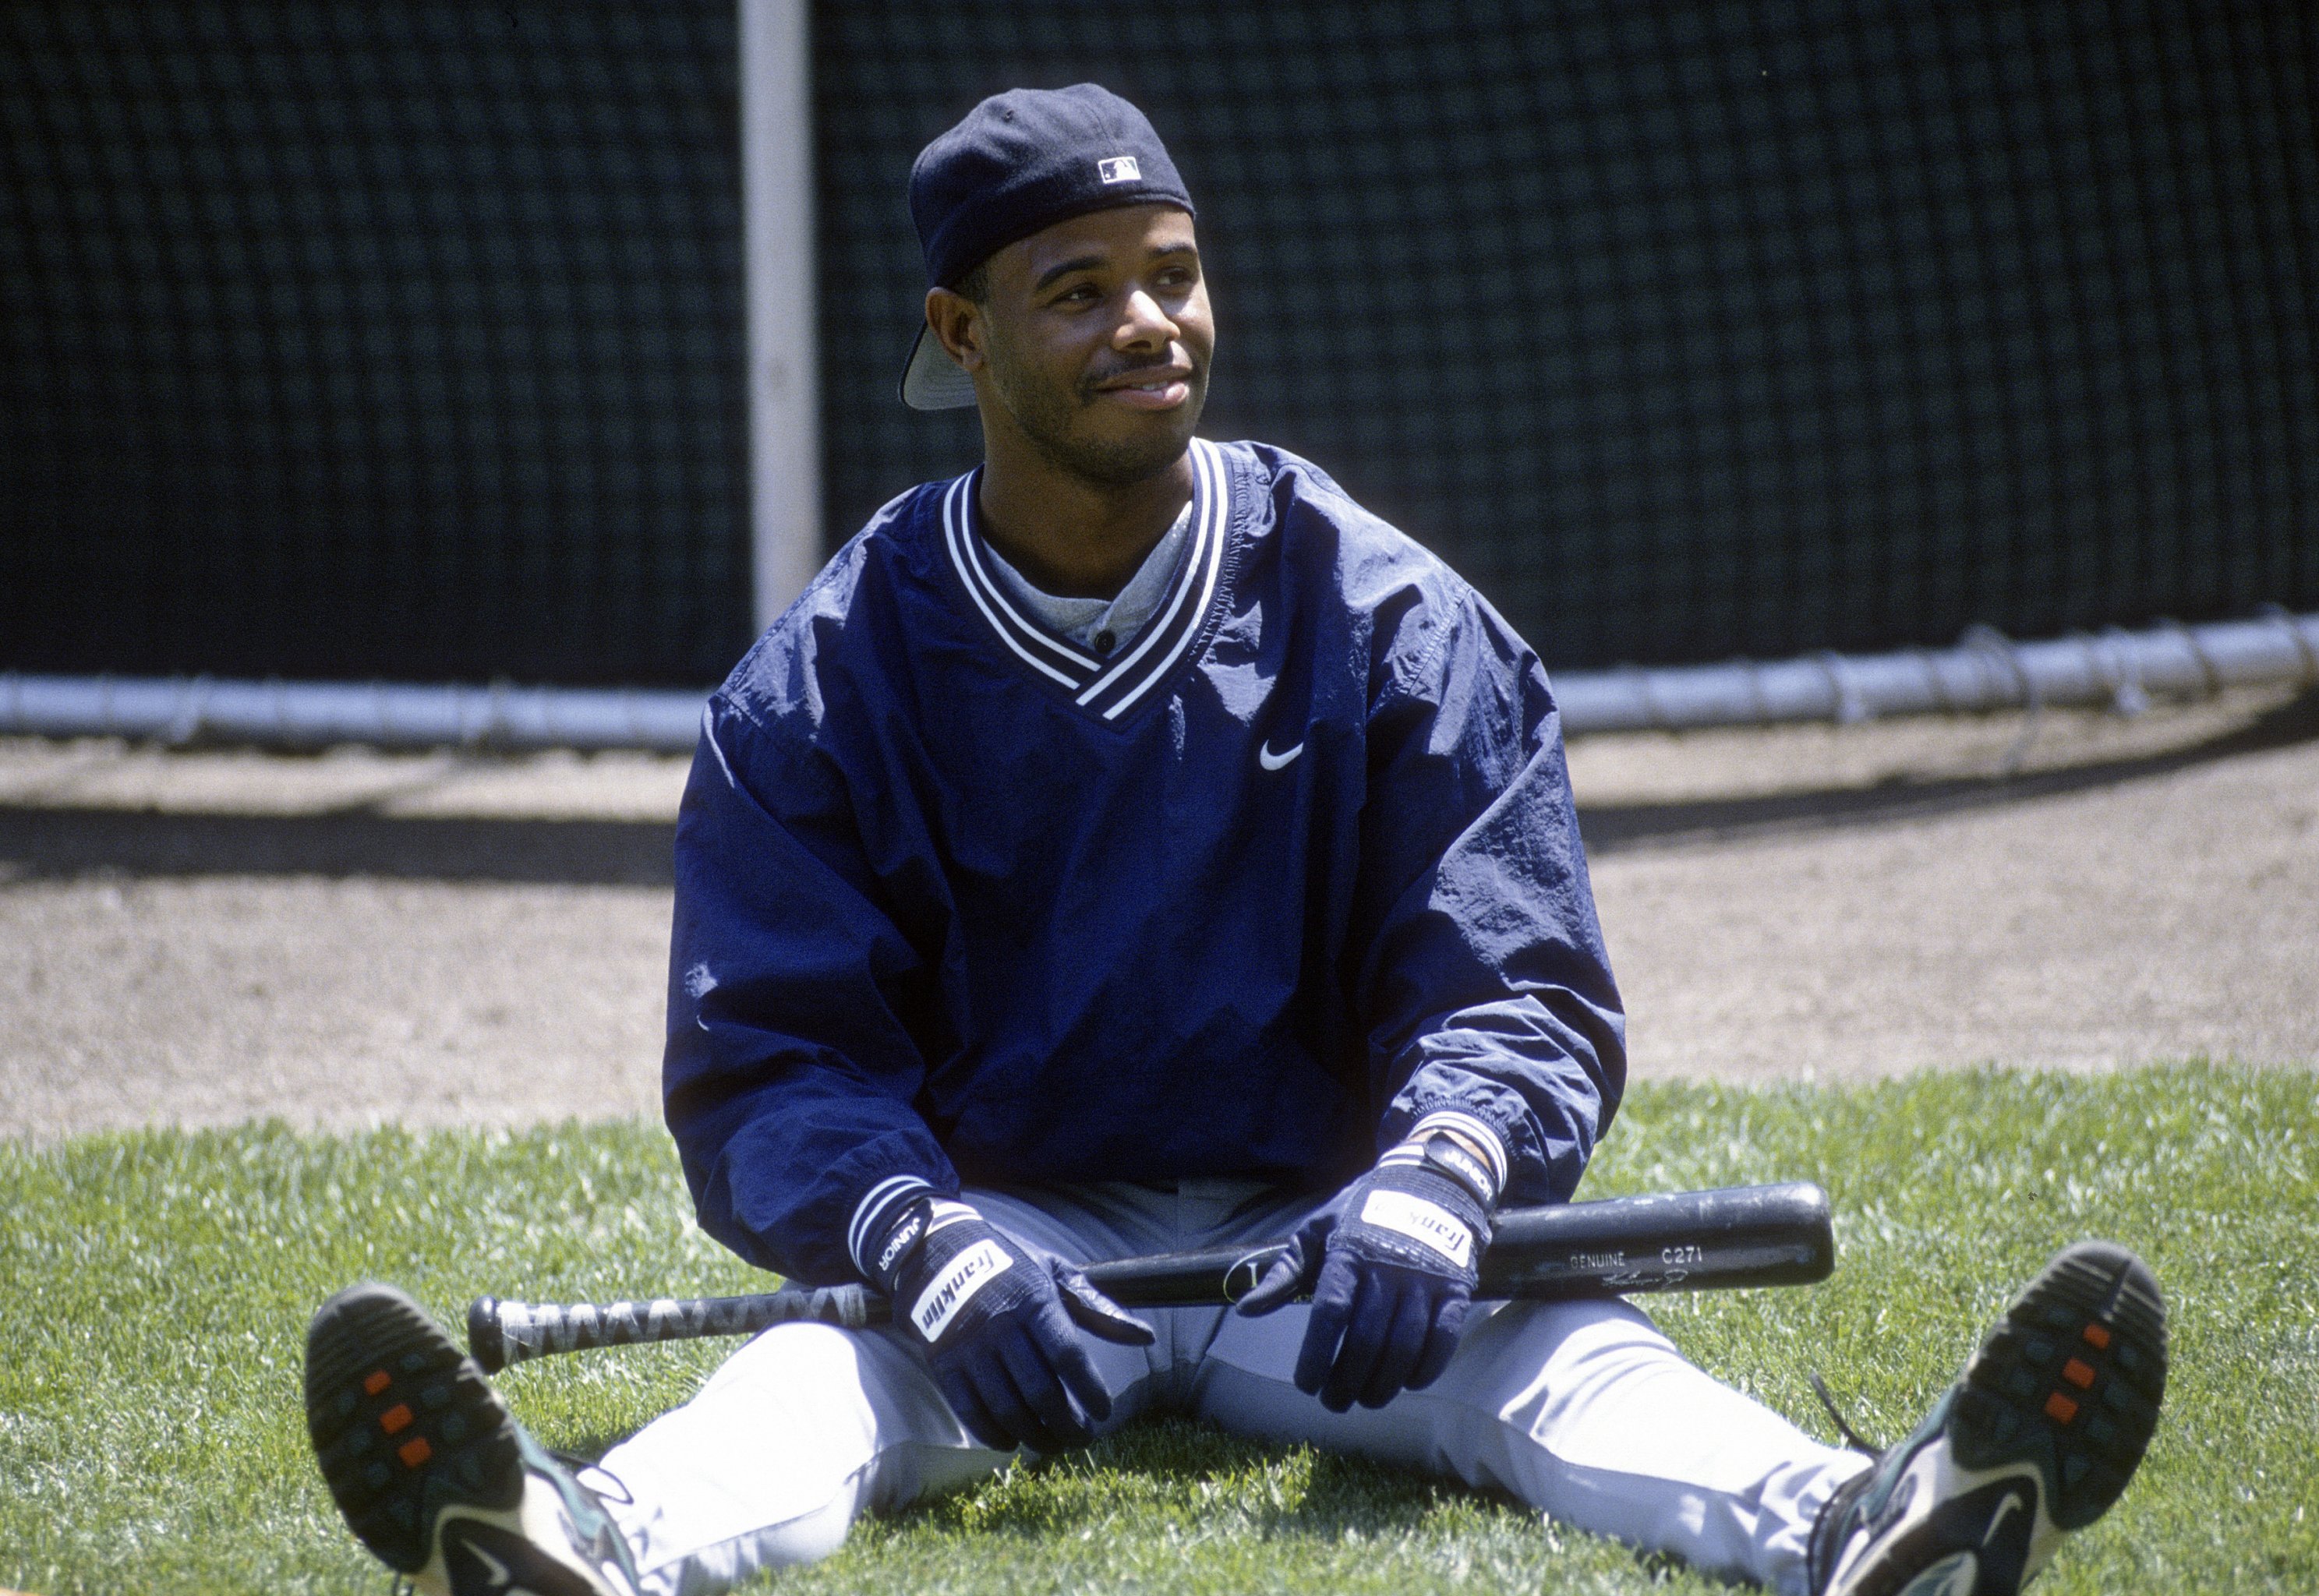 Ken Griffey Jr. went from rising star to face of Major League